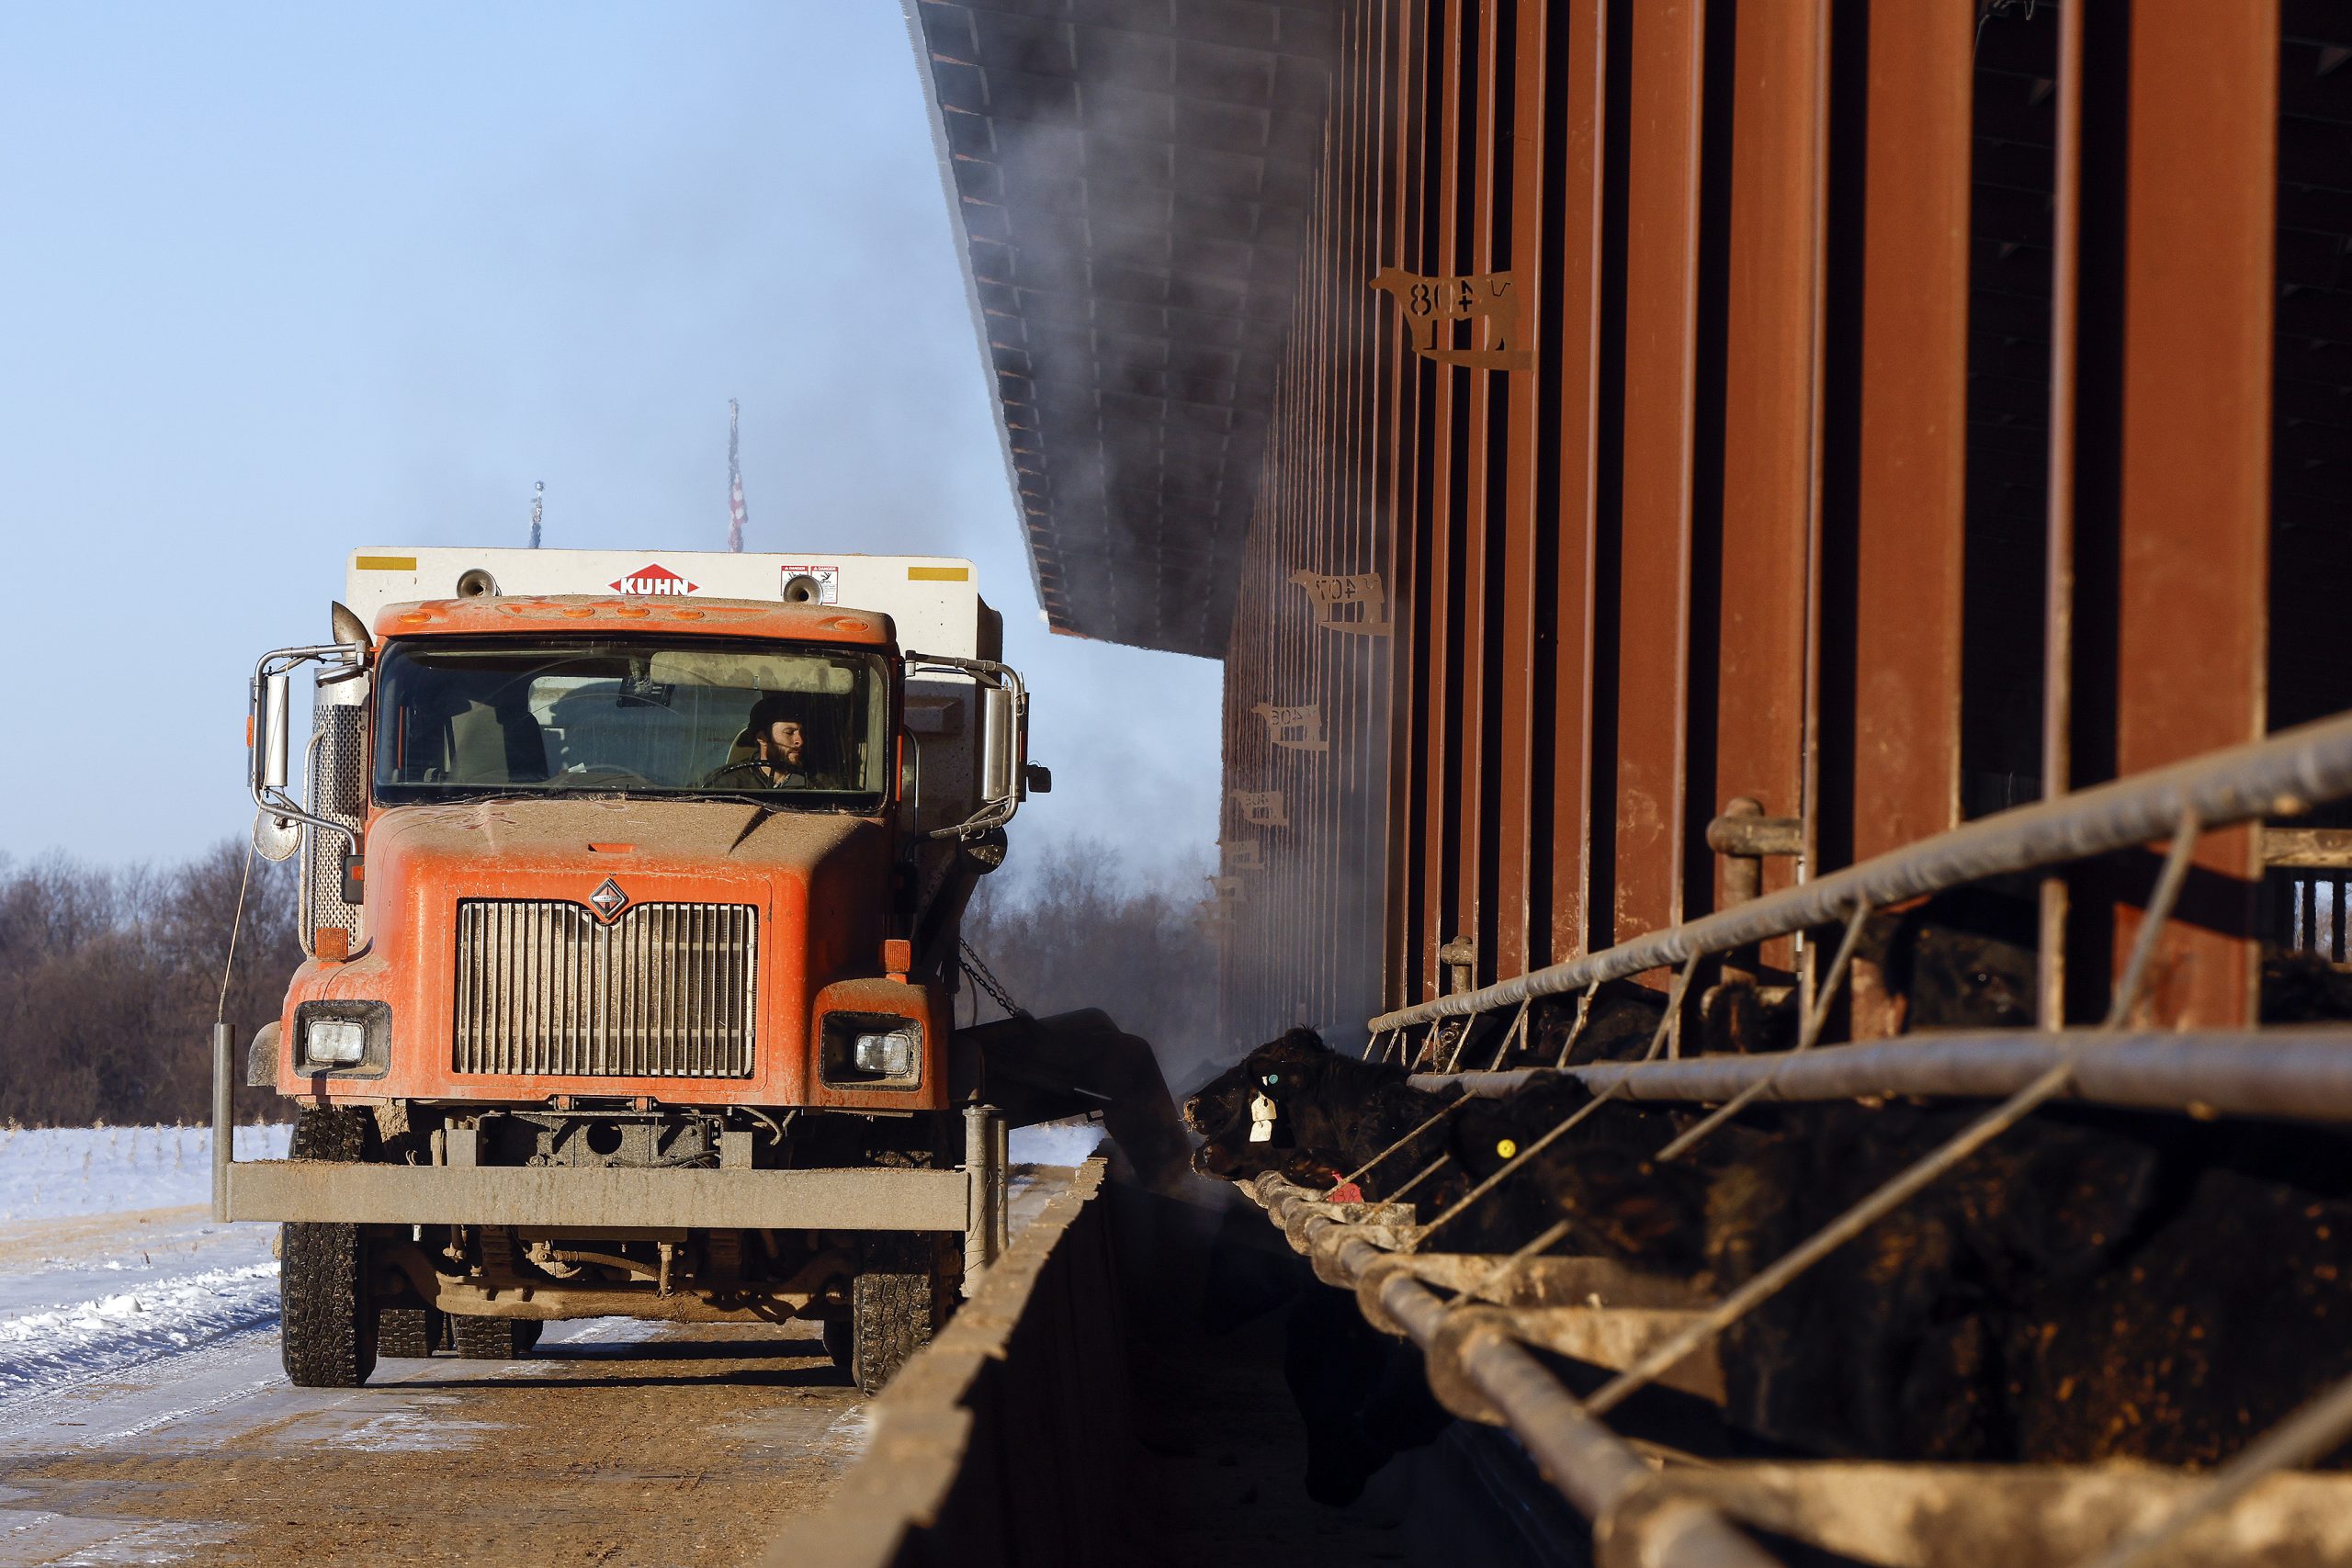 A dump truck carries feed along a dirt road lines with snow